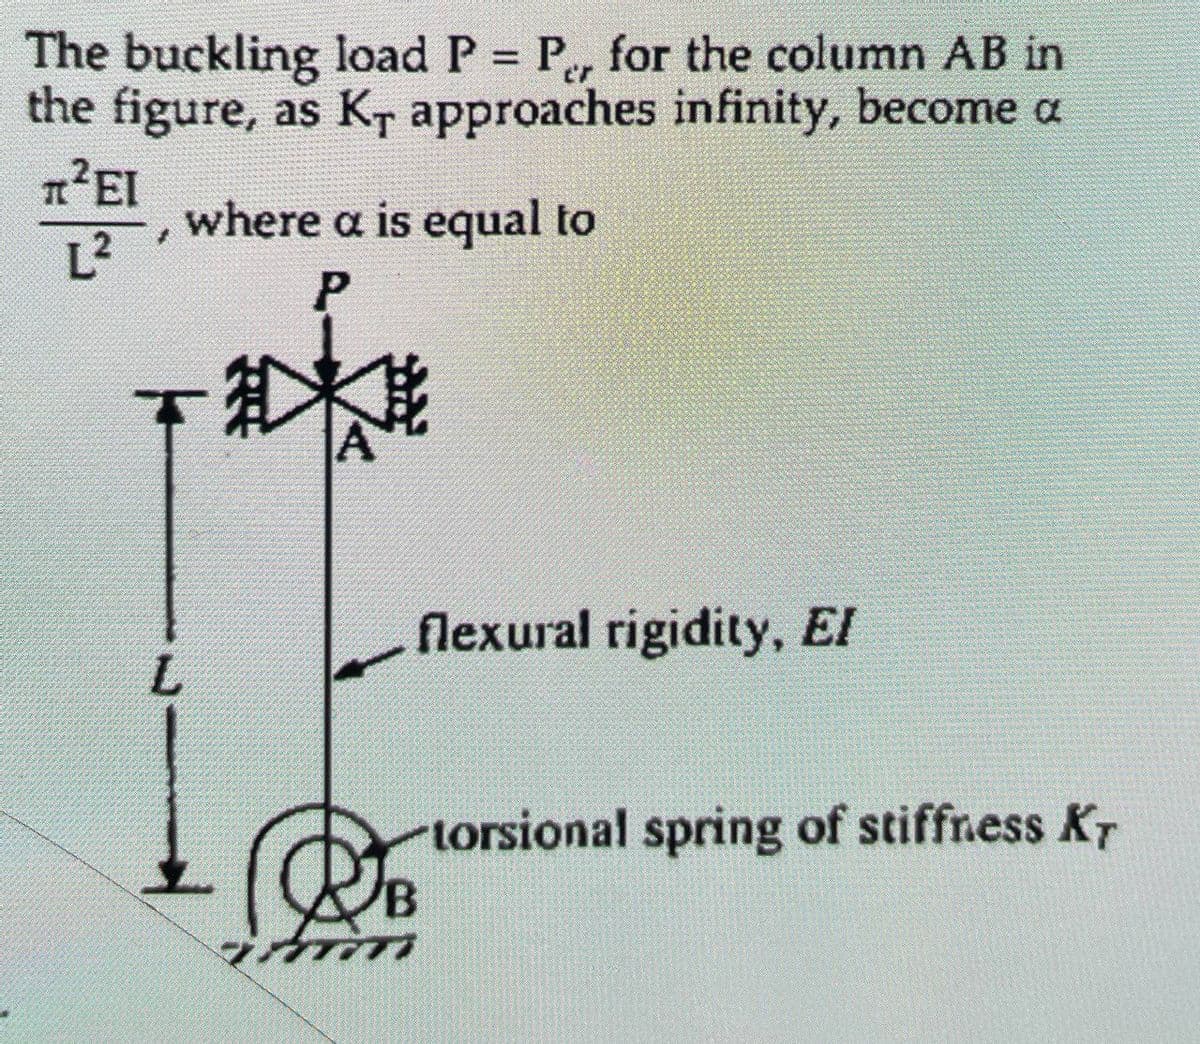 The buckling load P = P, for the column AB in
the figure, as Kr approaches infinity, become a
π²EI
L²
L
where a is equal to
P
flexural rigidity, El
DB
imm
torsional spring of stiffness Kr